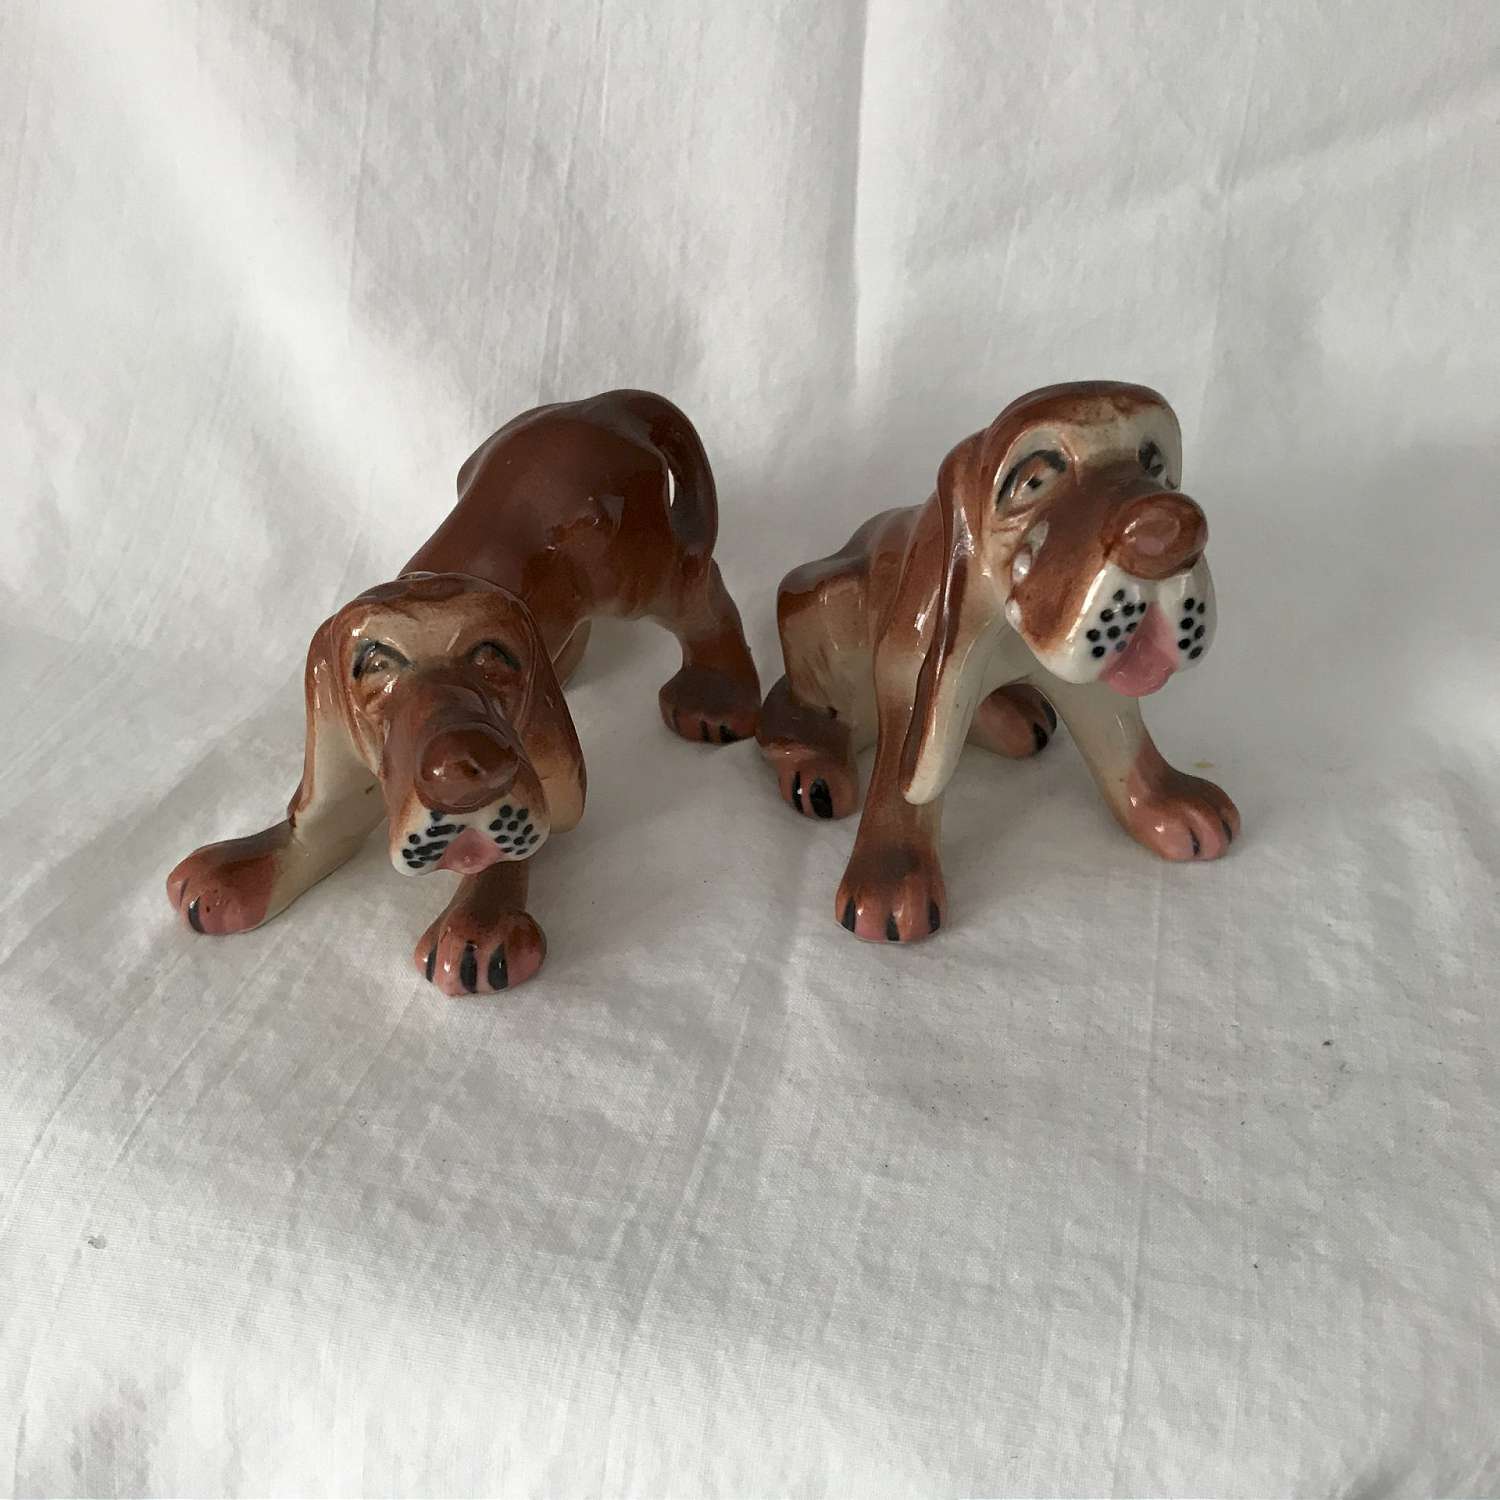 Pink Dog Salt and Pepper Shakers - vintage, collectible, animals, Japan,  rare